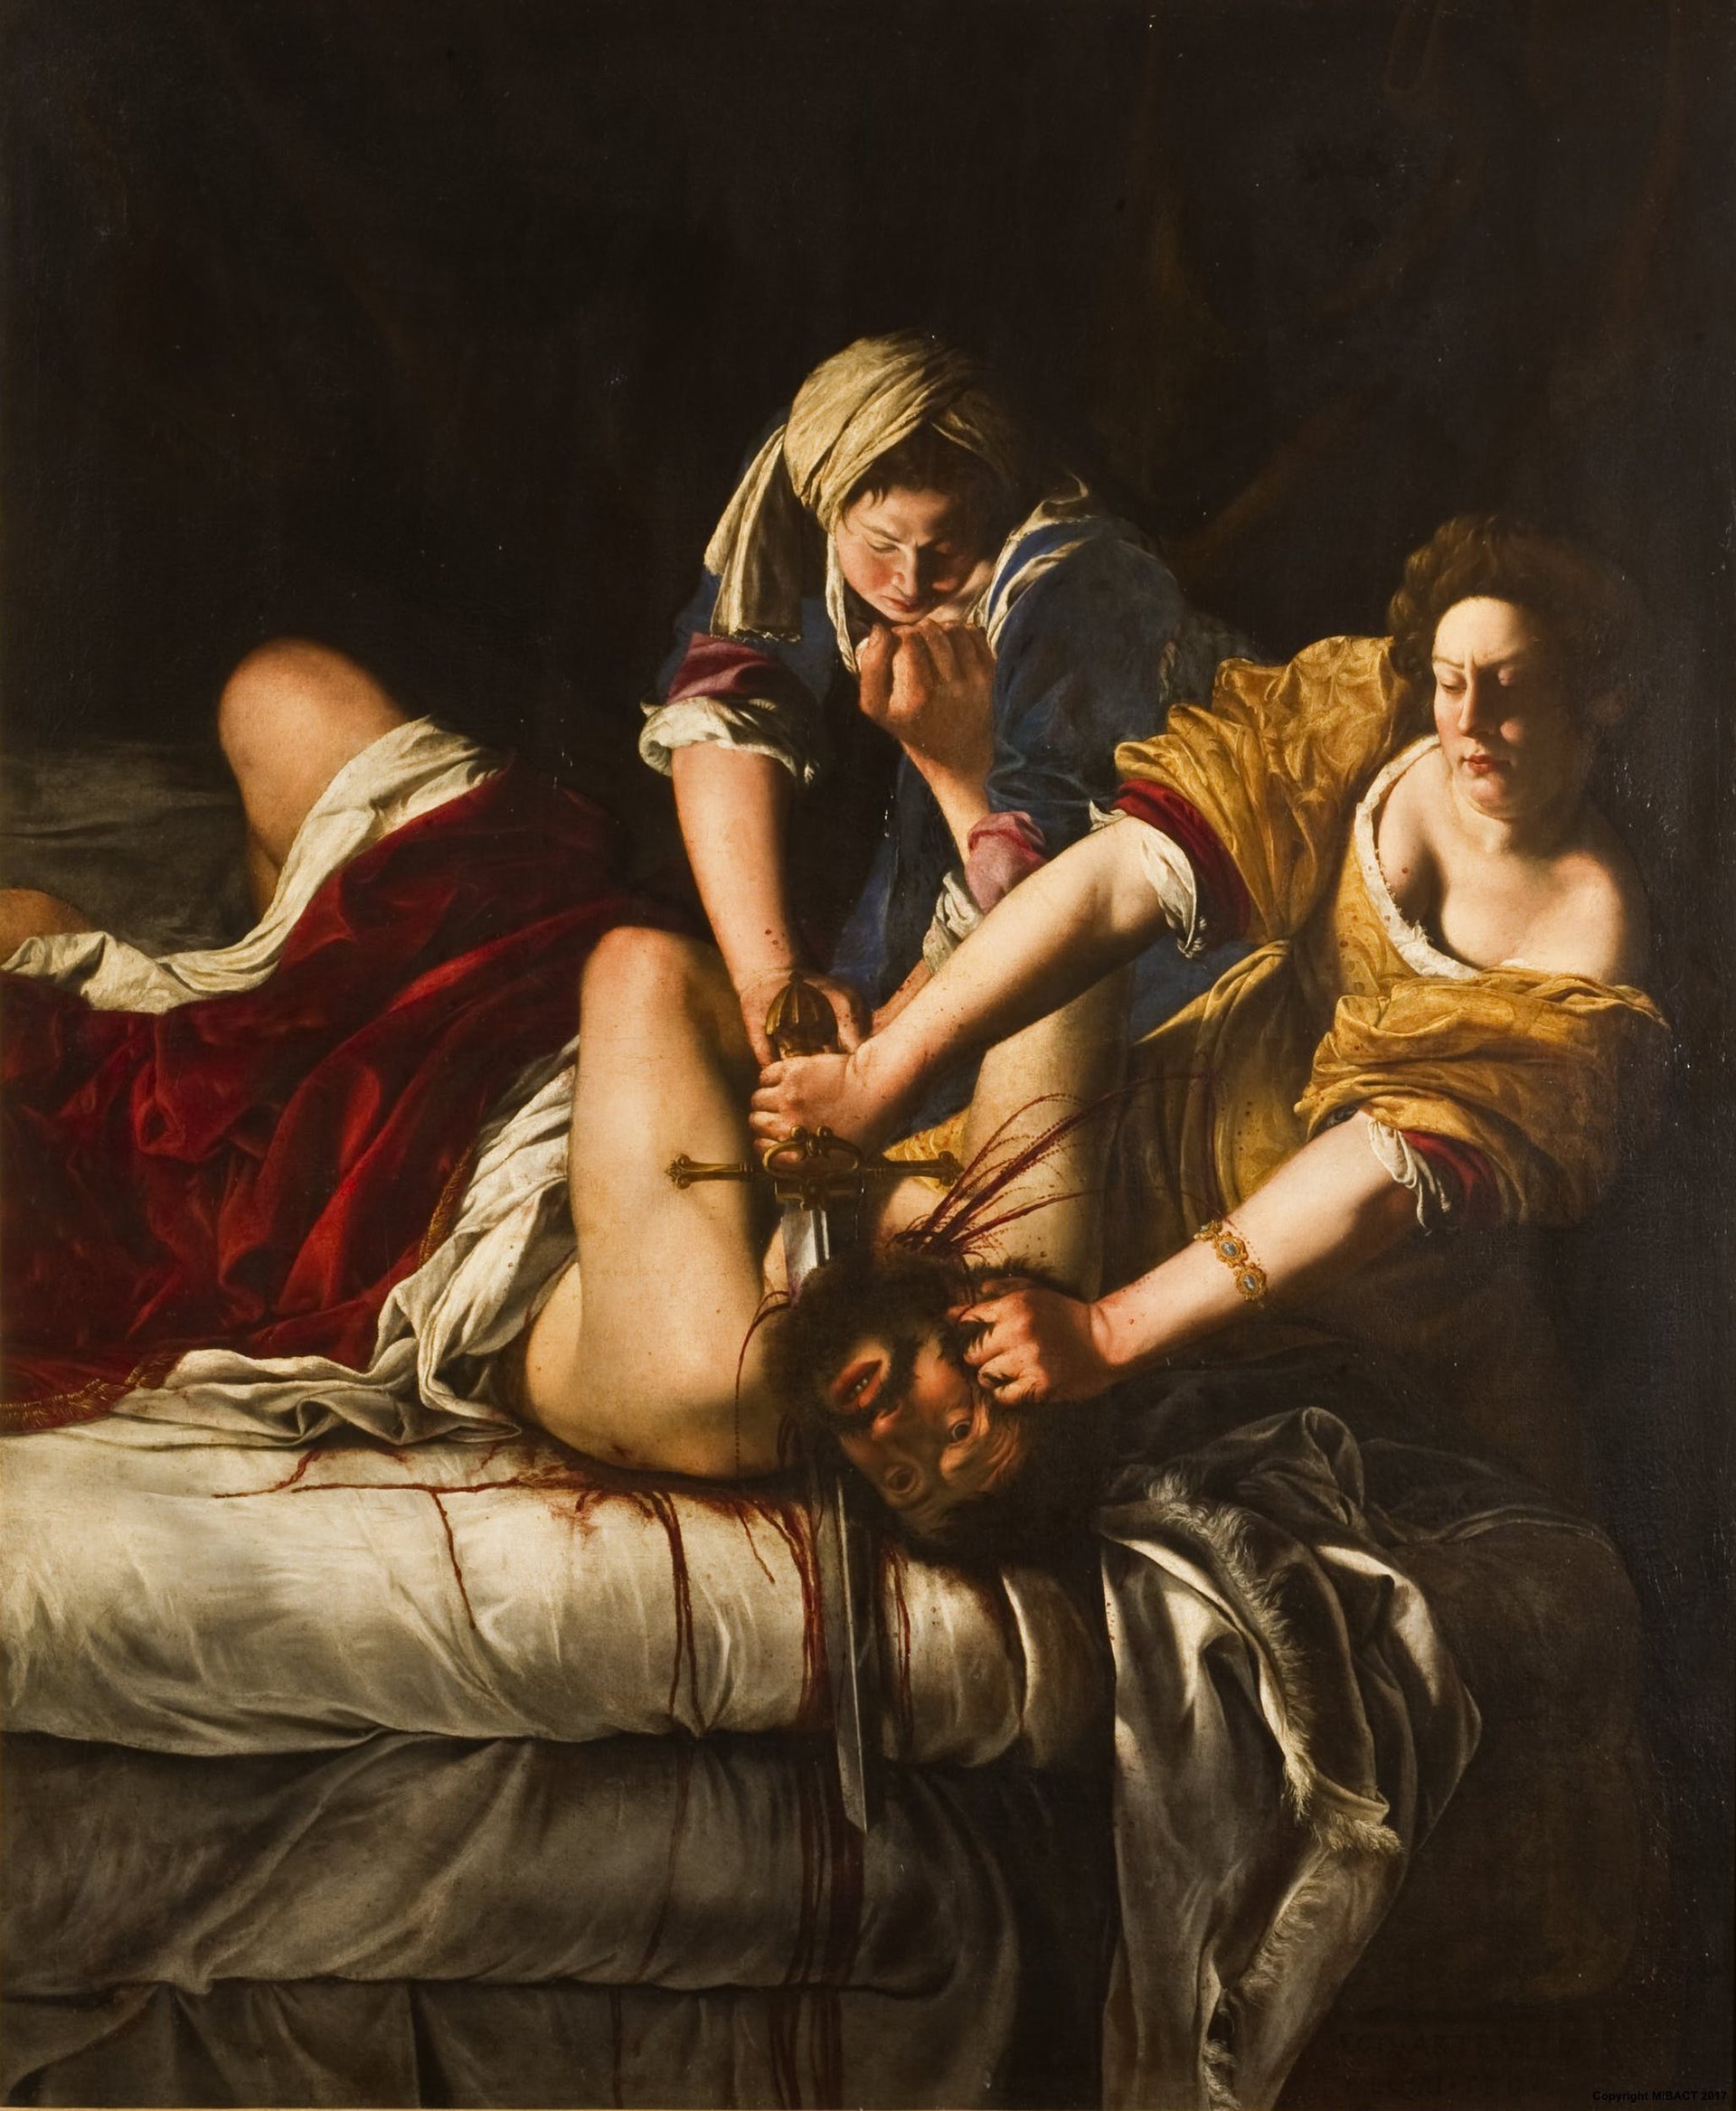 Three figures are centered on the canvas. A man on his back in a bed tries to fight back, kicking his legs and pushing a young woman in a blue dress and white head covering that is holding him down. Another woman in a yellow dress is cutting off his head with a sword. Blood is streaming down the bed and spraying from his neck. The man looks anguished and surprised while the woman in the yellow dress looks determined. Her sleeves are pushed up past her elbows as she completes her task. 